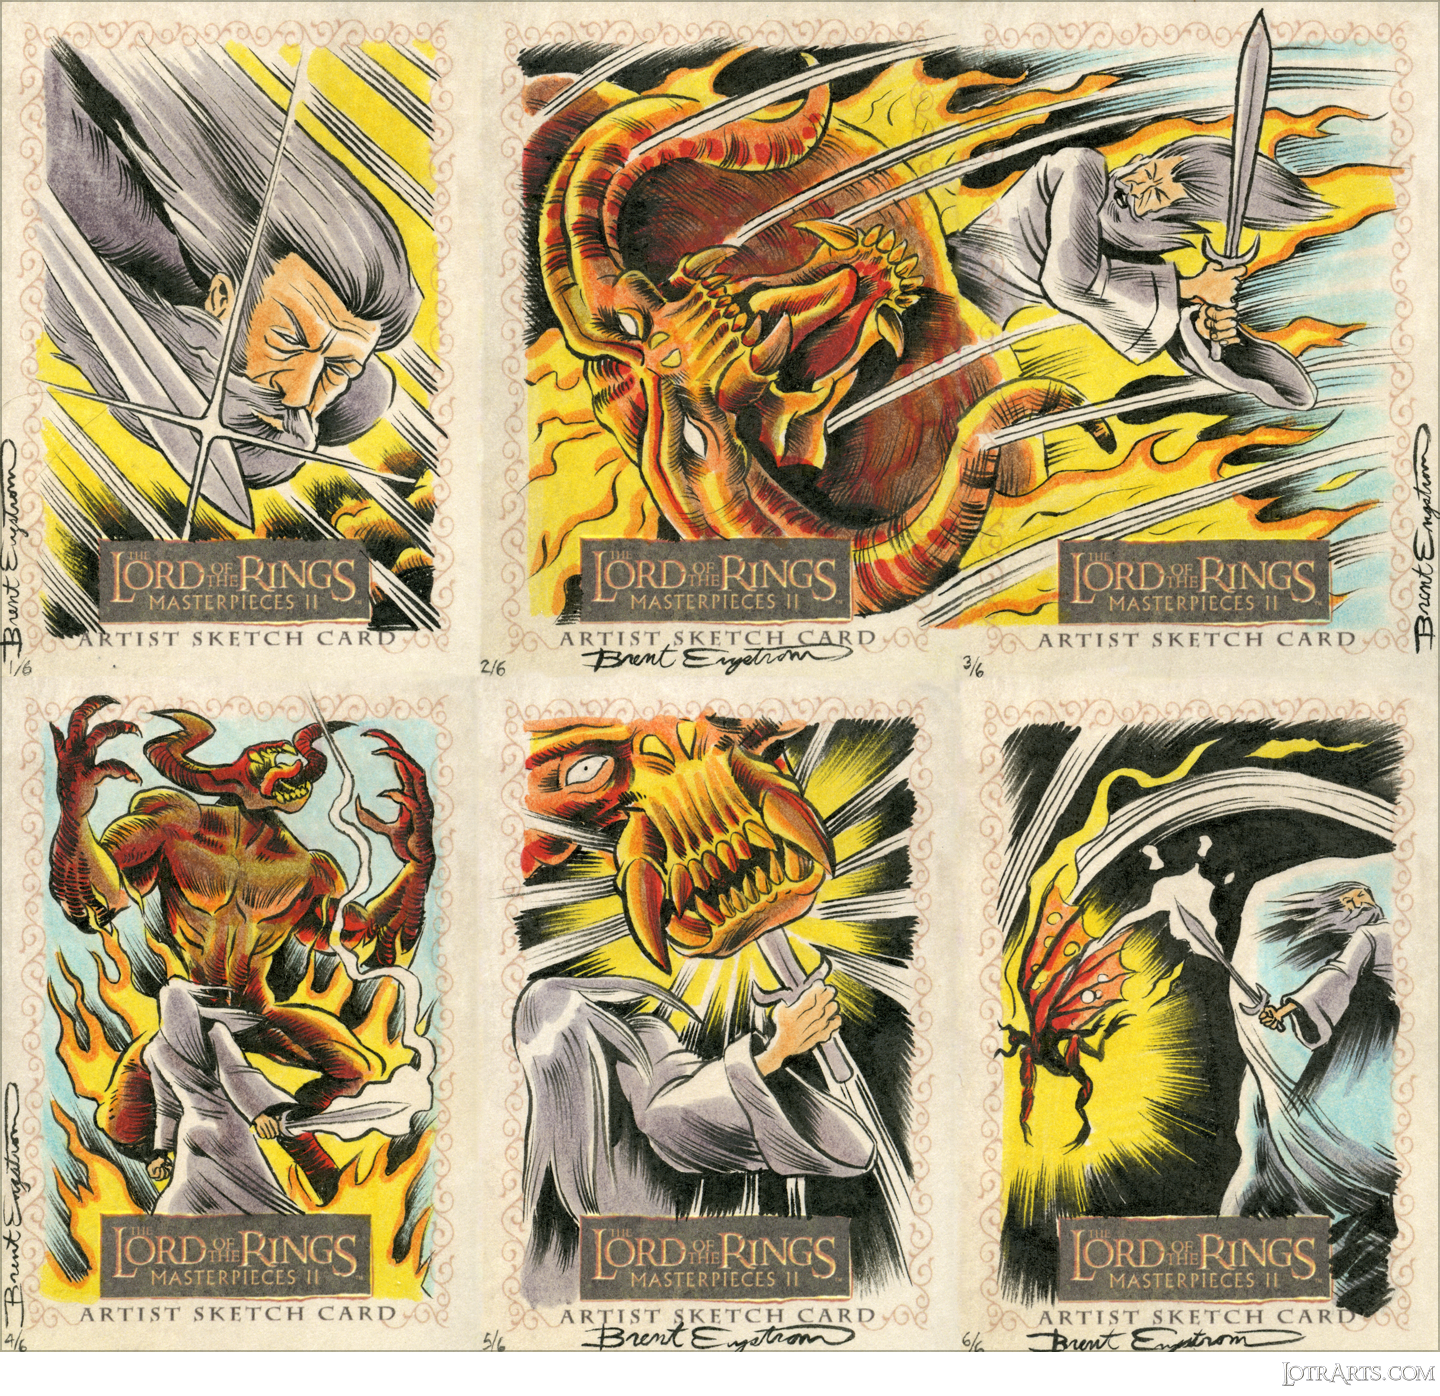 Battle of the Balrog and Gandalf, six-card sequenced scene panel, by Engstrom: artist return sketches<span class="ngViews">22 views</span>